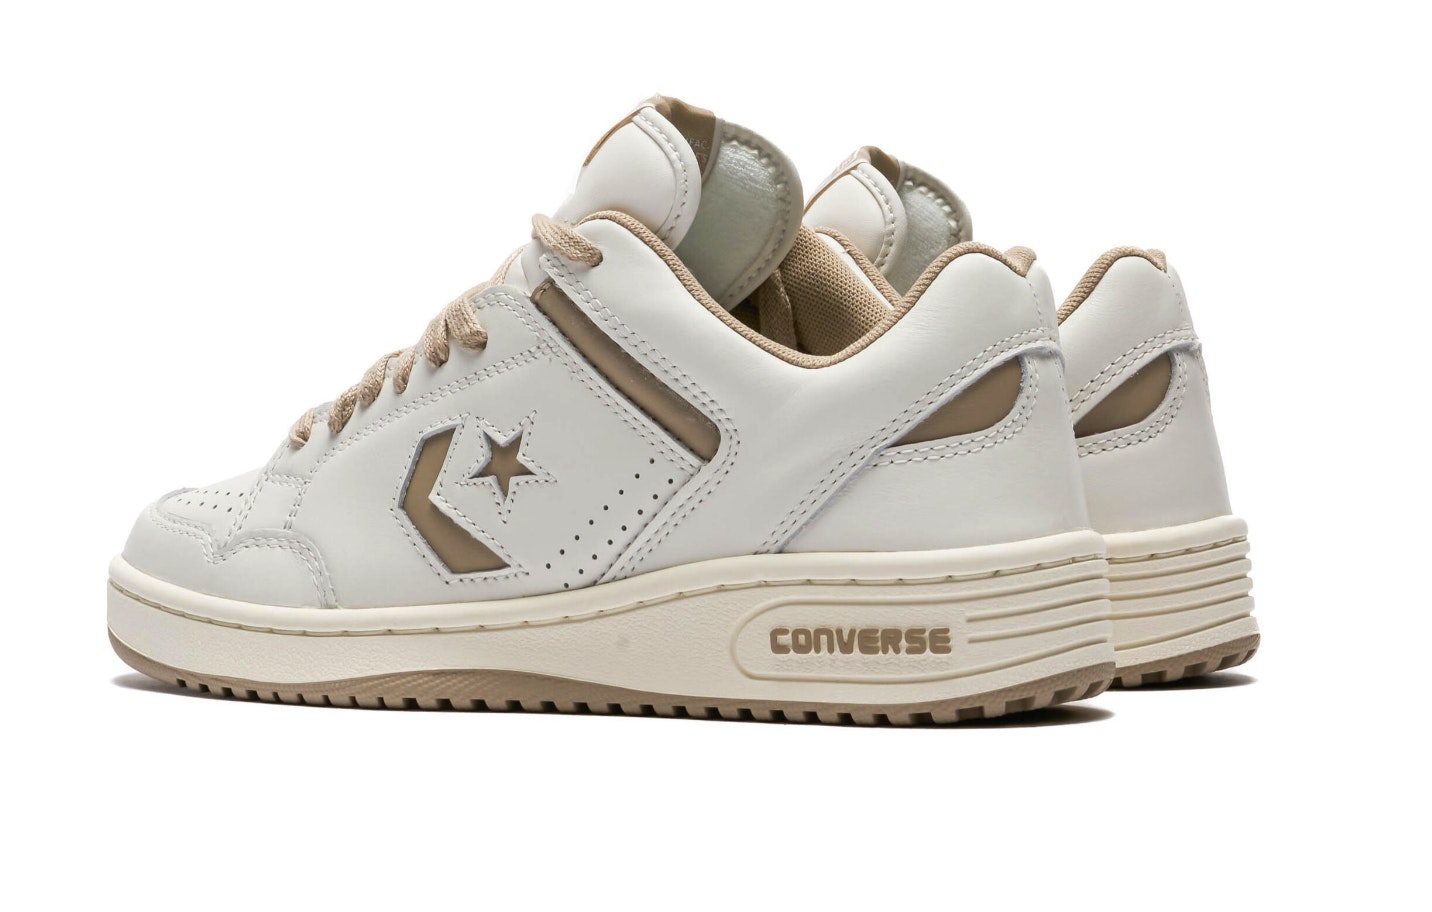 Old Money x Converse Weapon OX Low "Vintage Cargo"